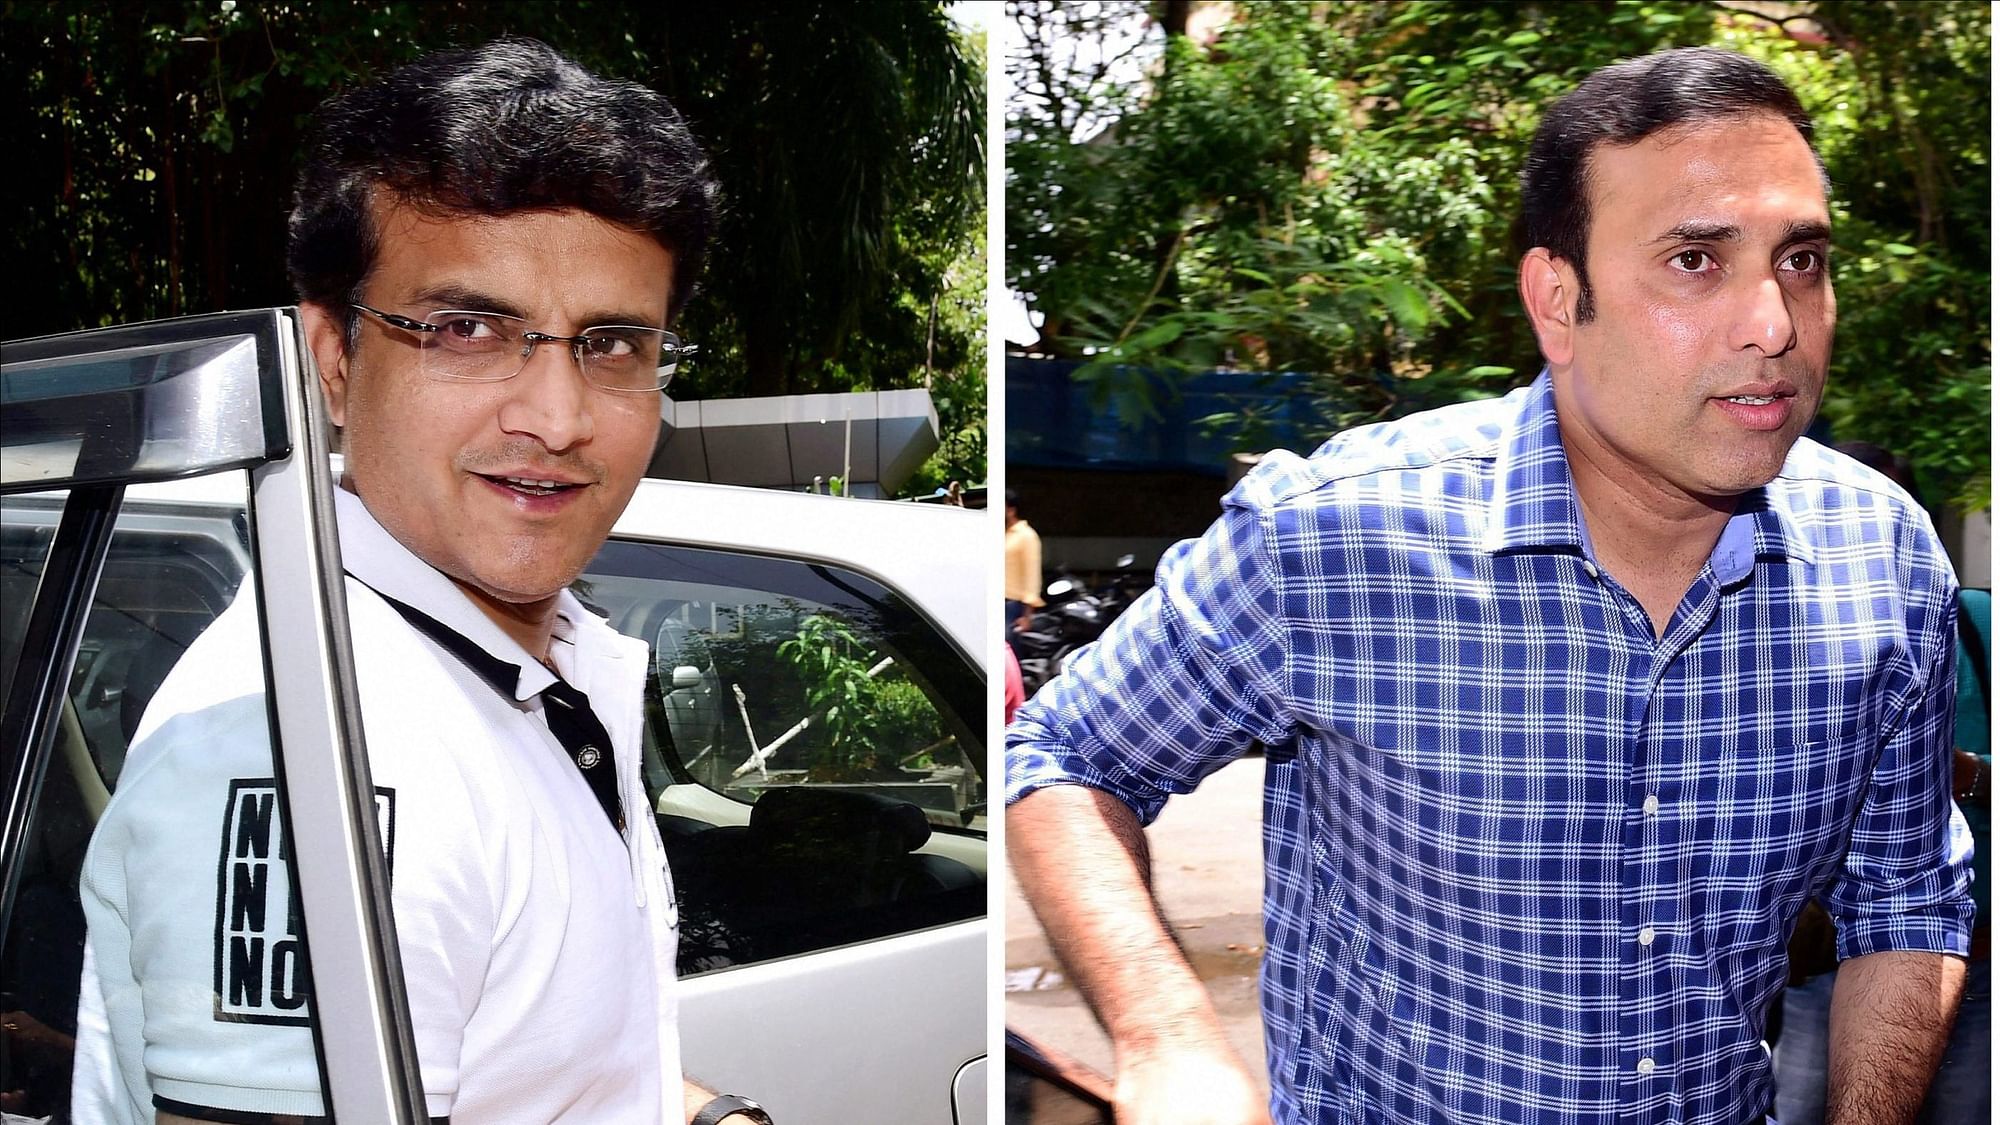 Sourav Ganguly and VVS Laxman have been found to be in Conflict of Interest due to their roles in the CAC and with IPL teams.